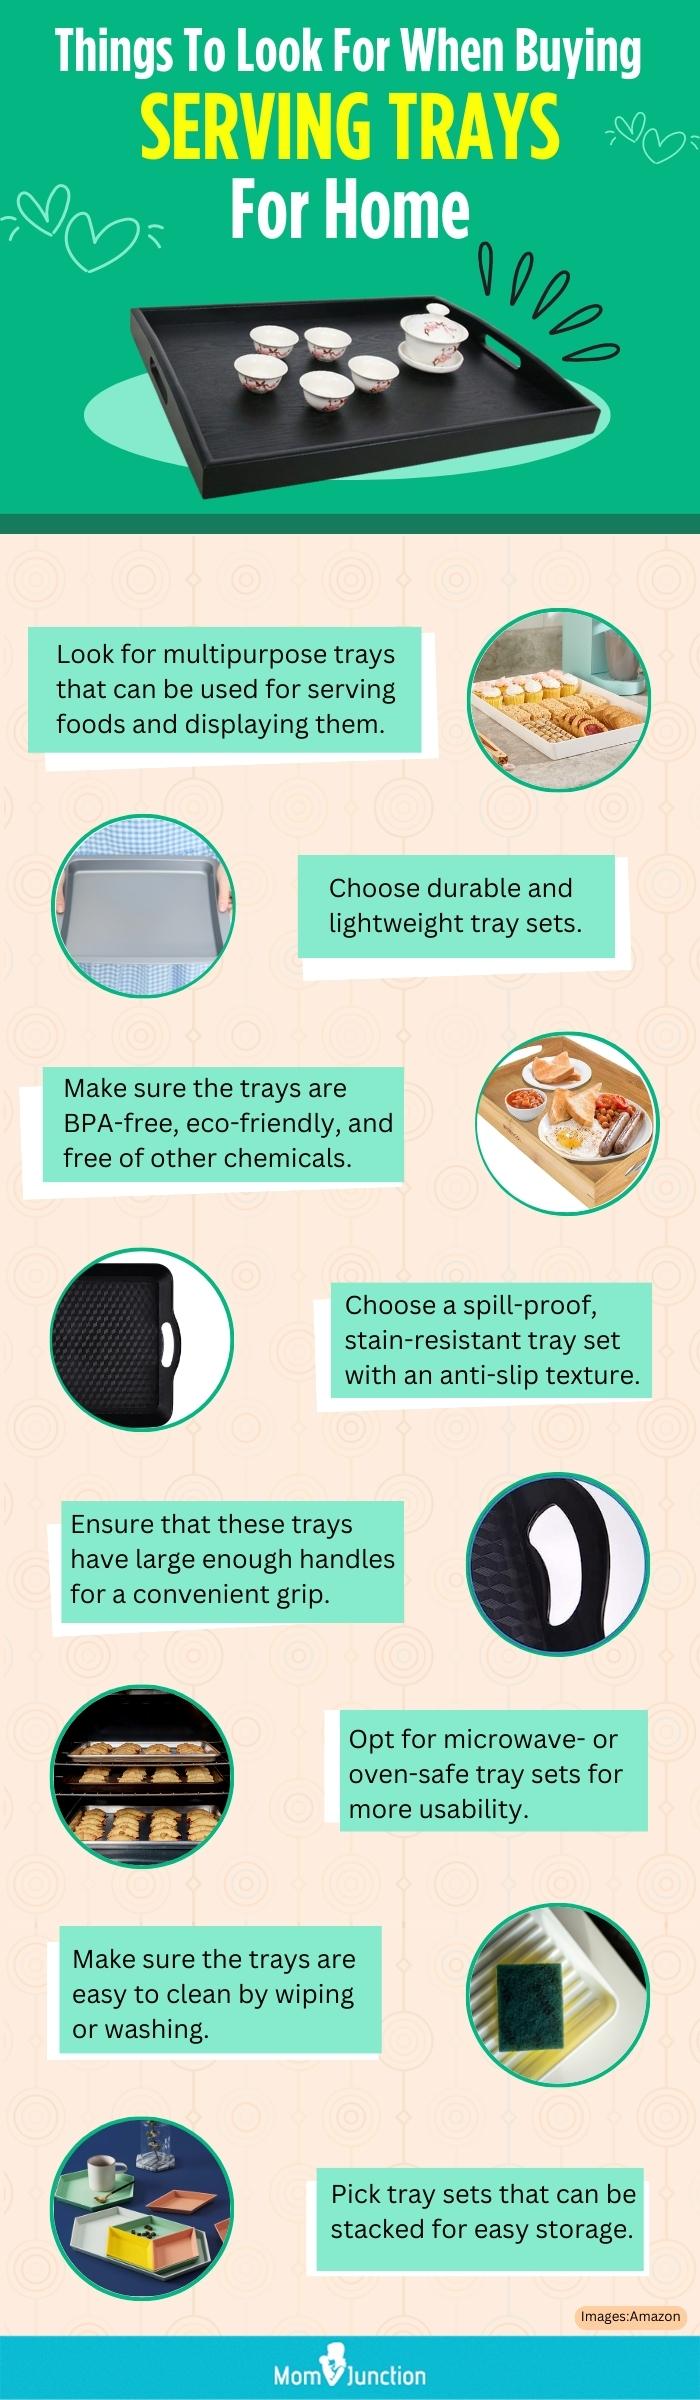 Things To Look For When Buying Serving Trays For Home (infographic)